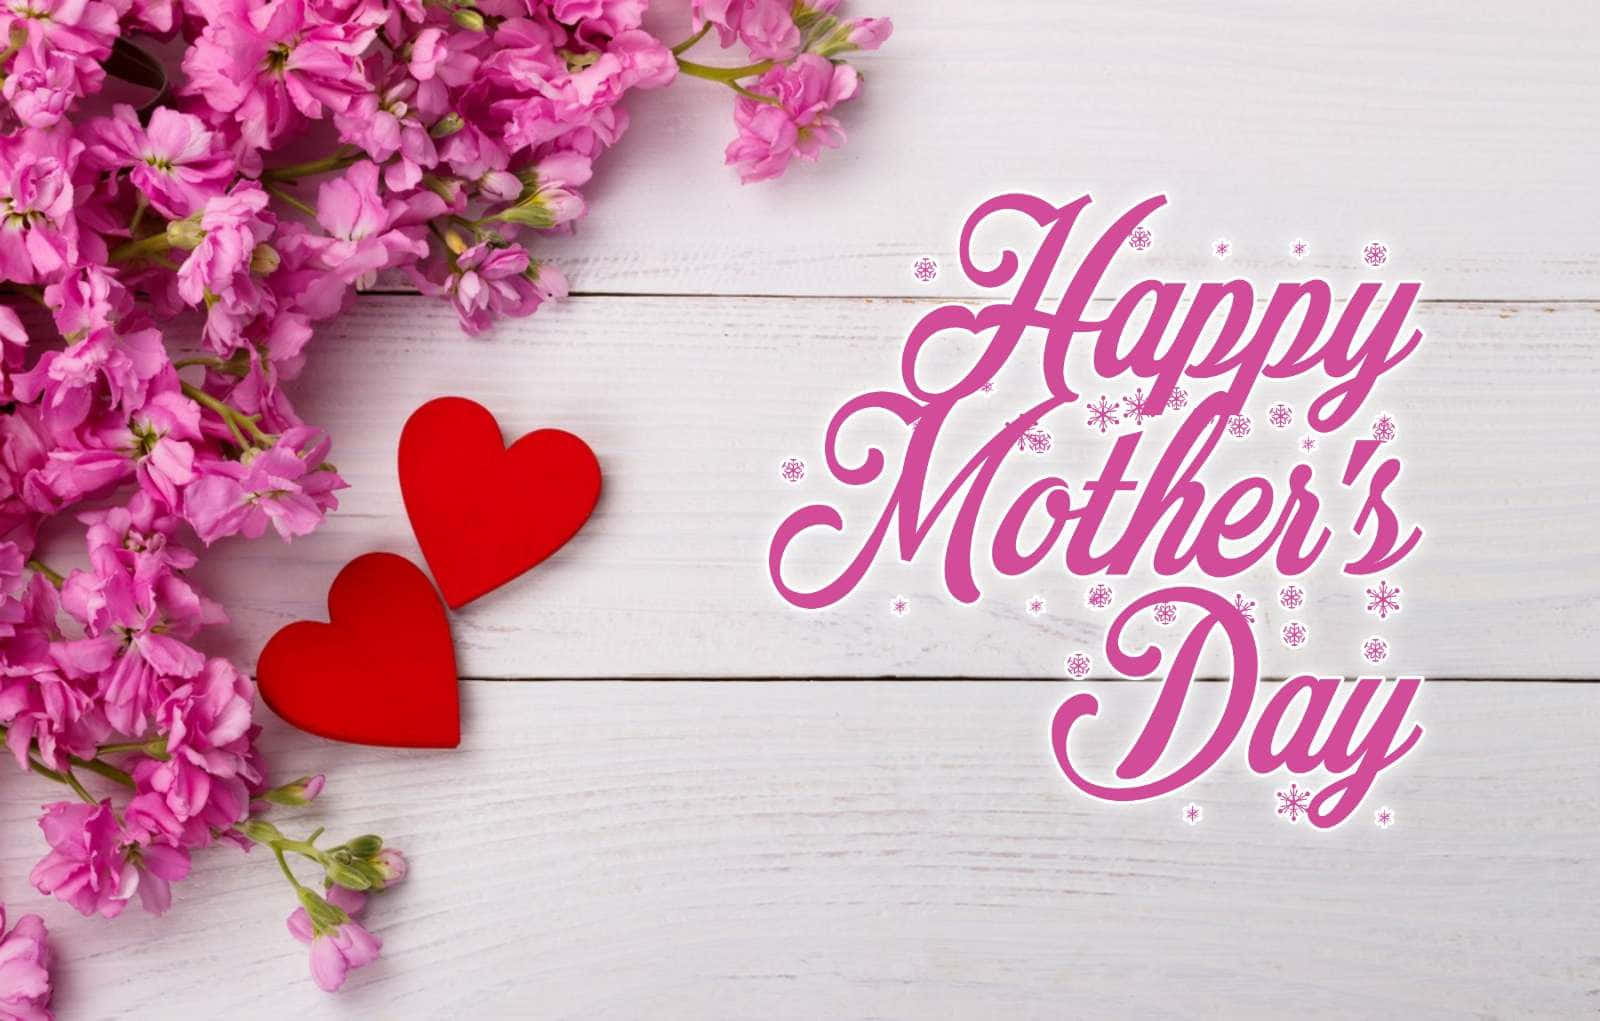 Happy Mother's Day Images With Hearts And Flowers